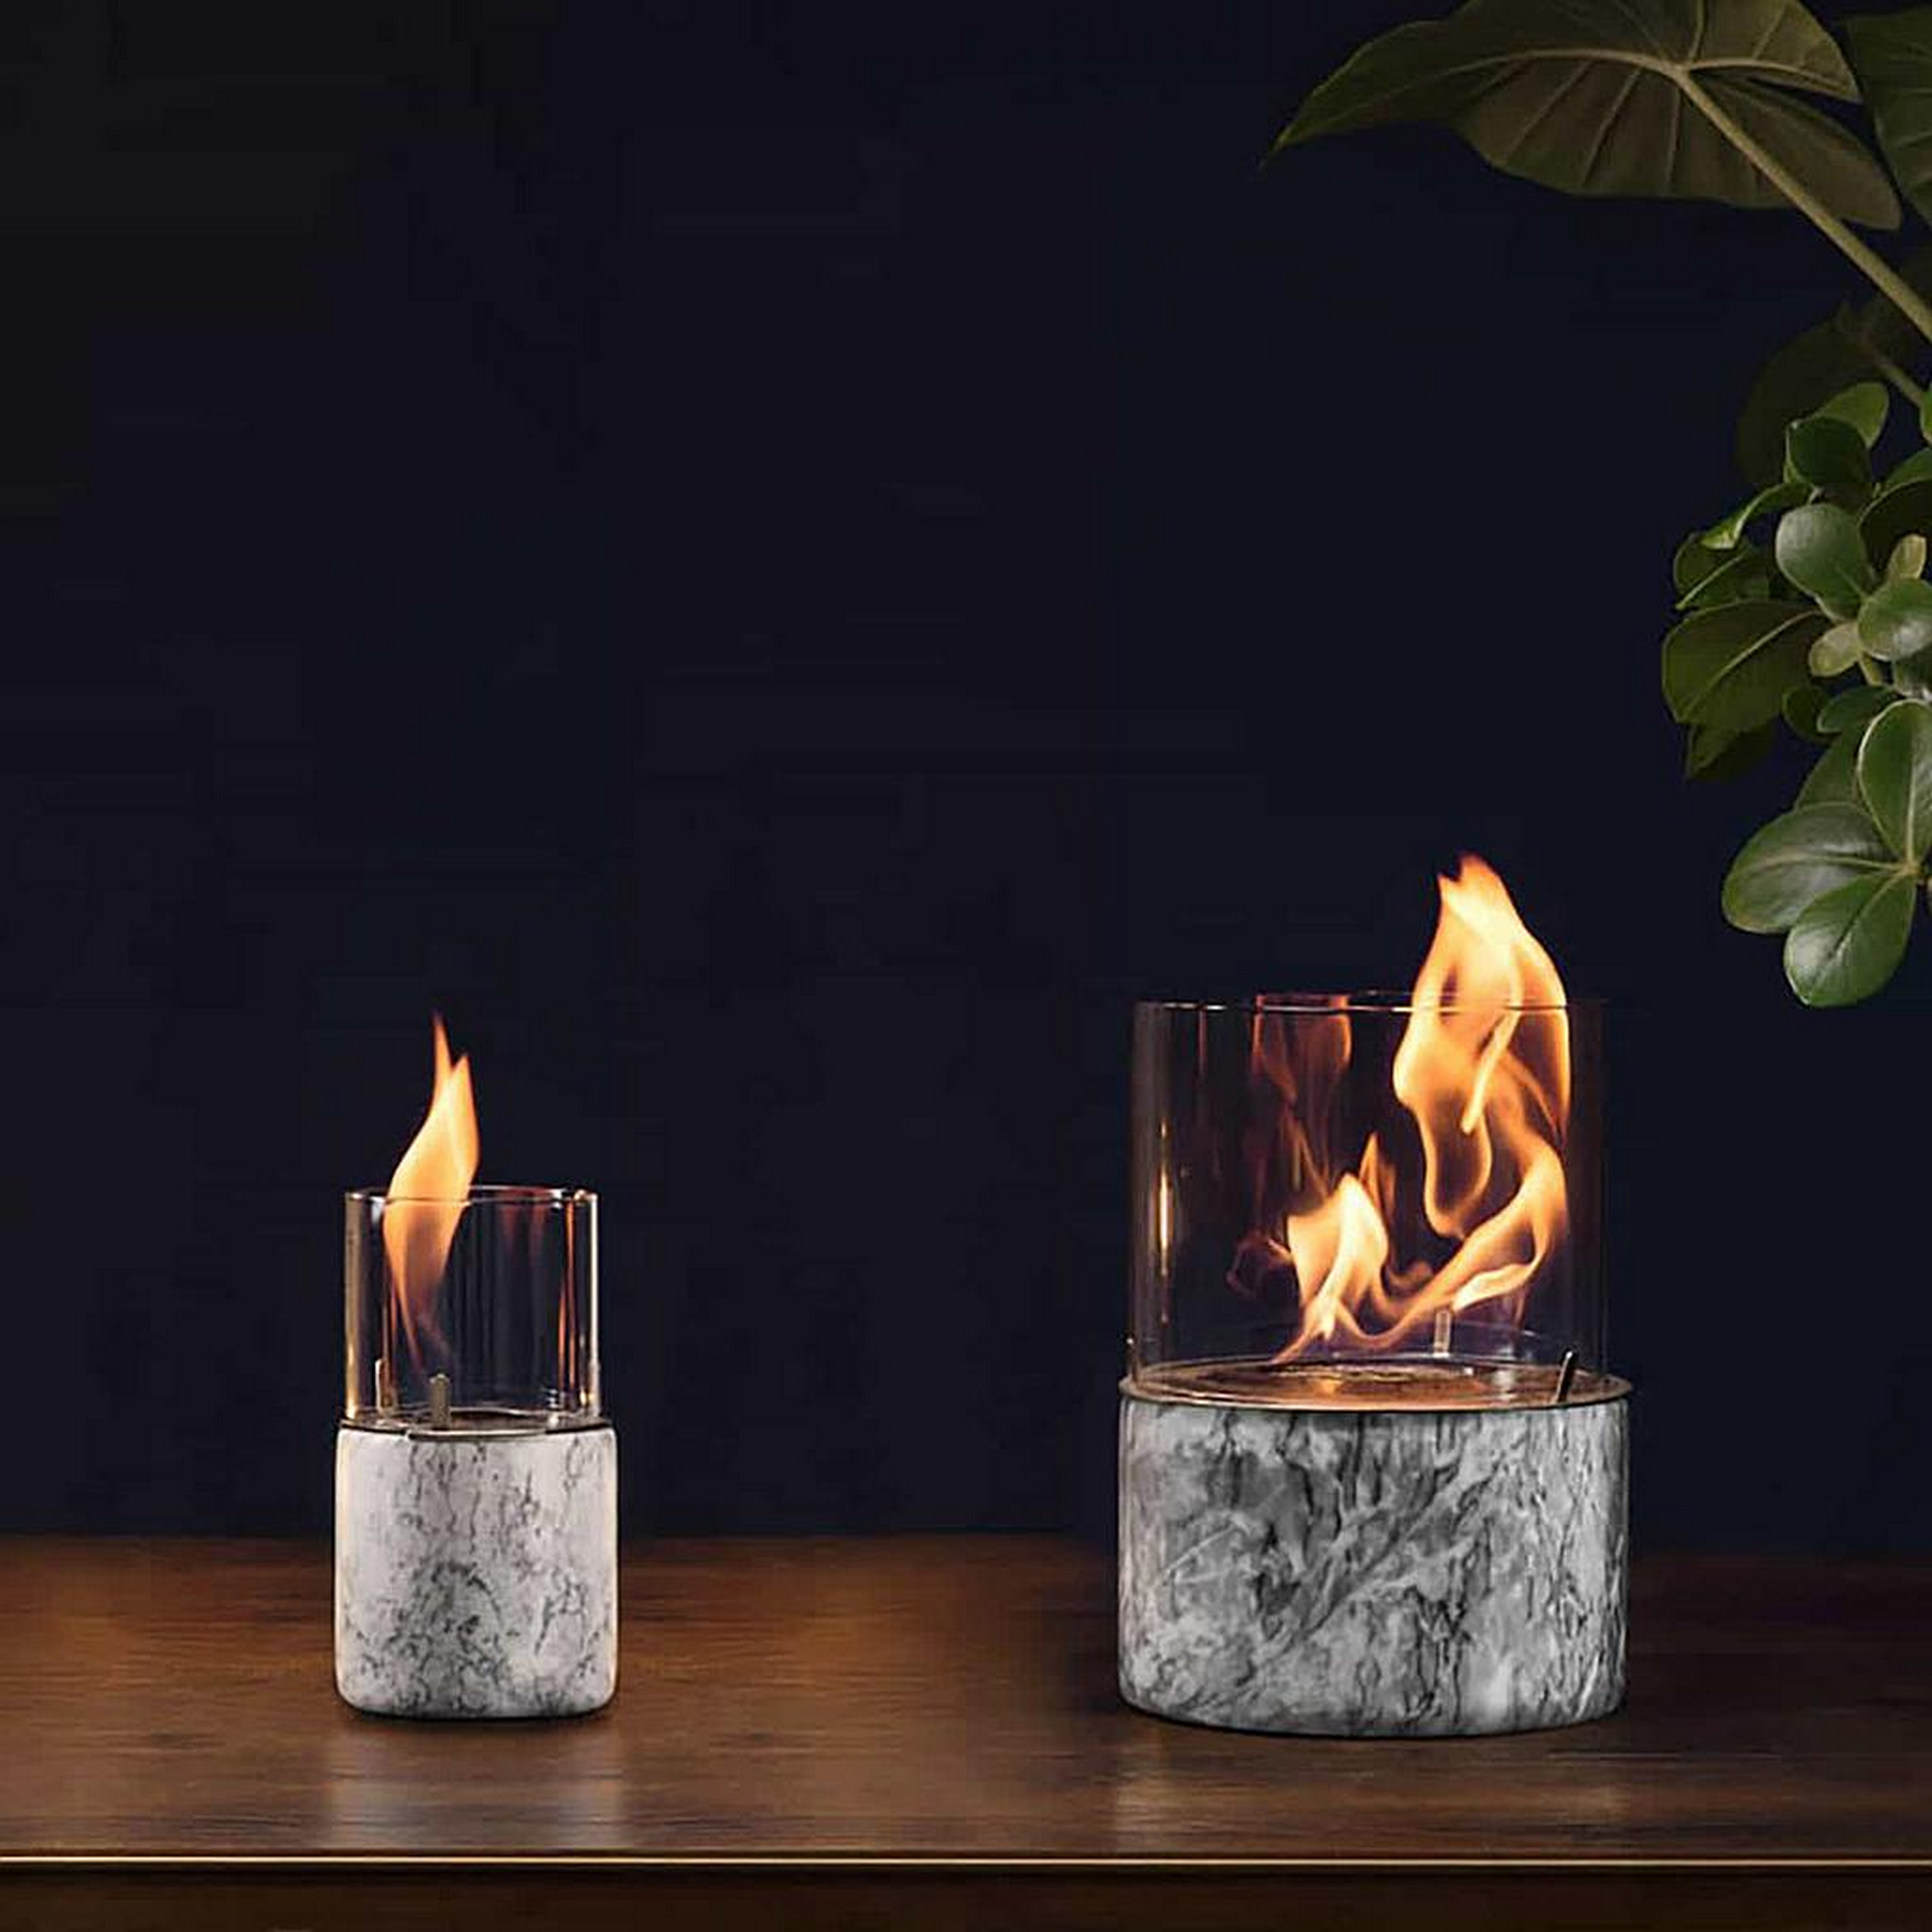 Tischfeuer 'Pino M' Marmor 150 ml + product picture